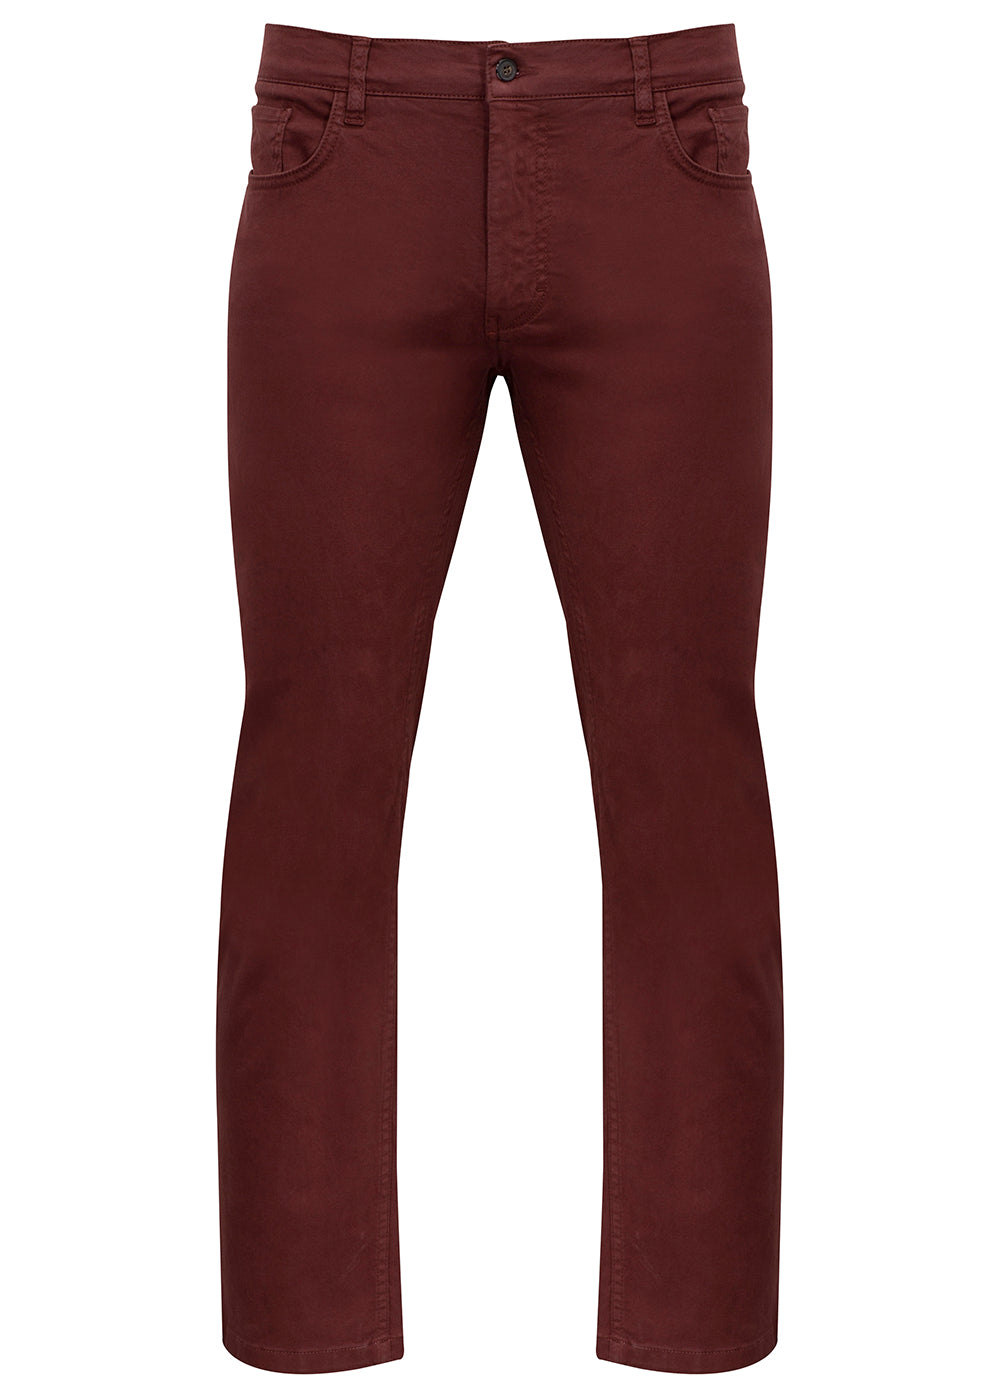 Alan Paine Cheltham 5 PKT Chino Jeans